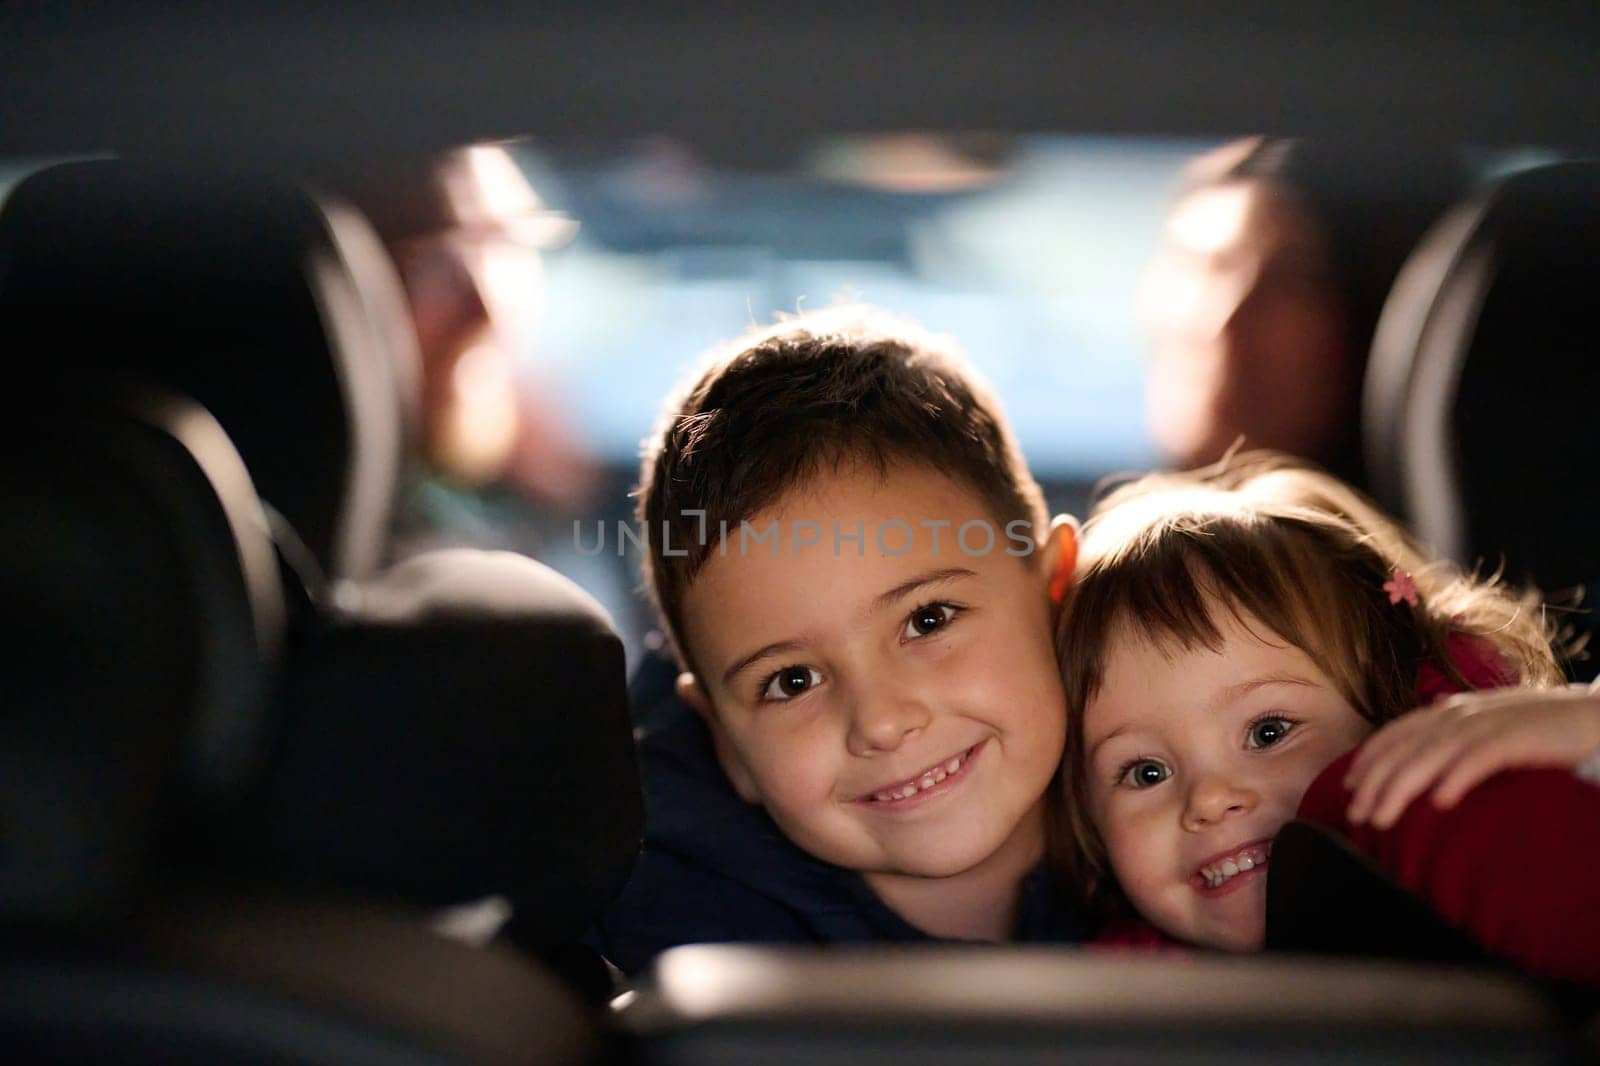 A young brother and sister enjoying a car ride together, immersed in the adventure of travel by dotshock